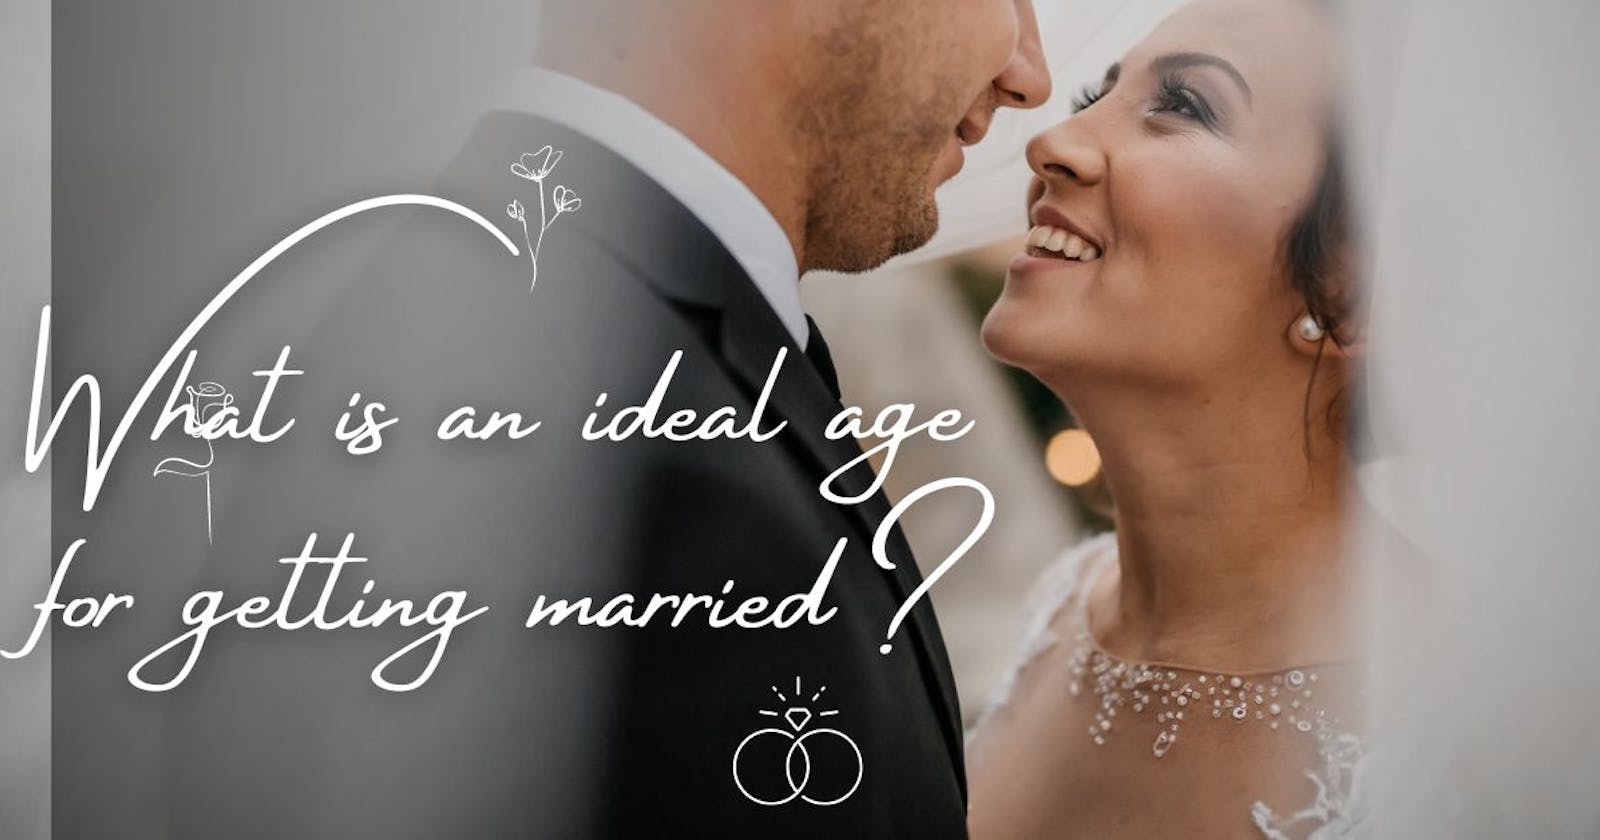 What is an ideal age for getting married?